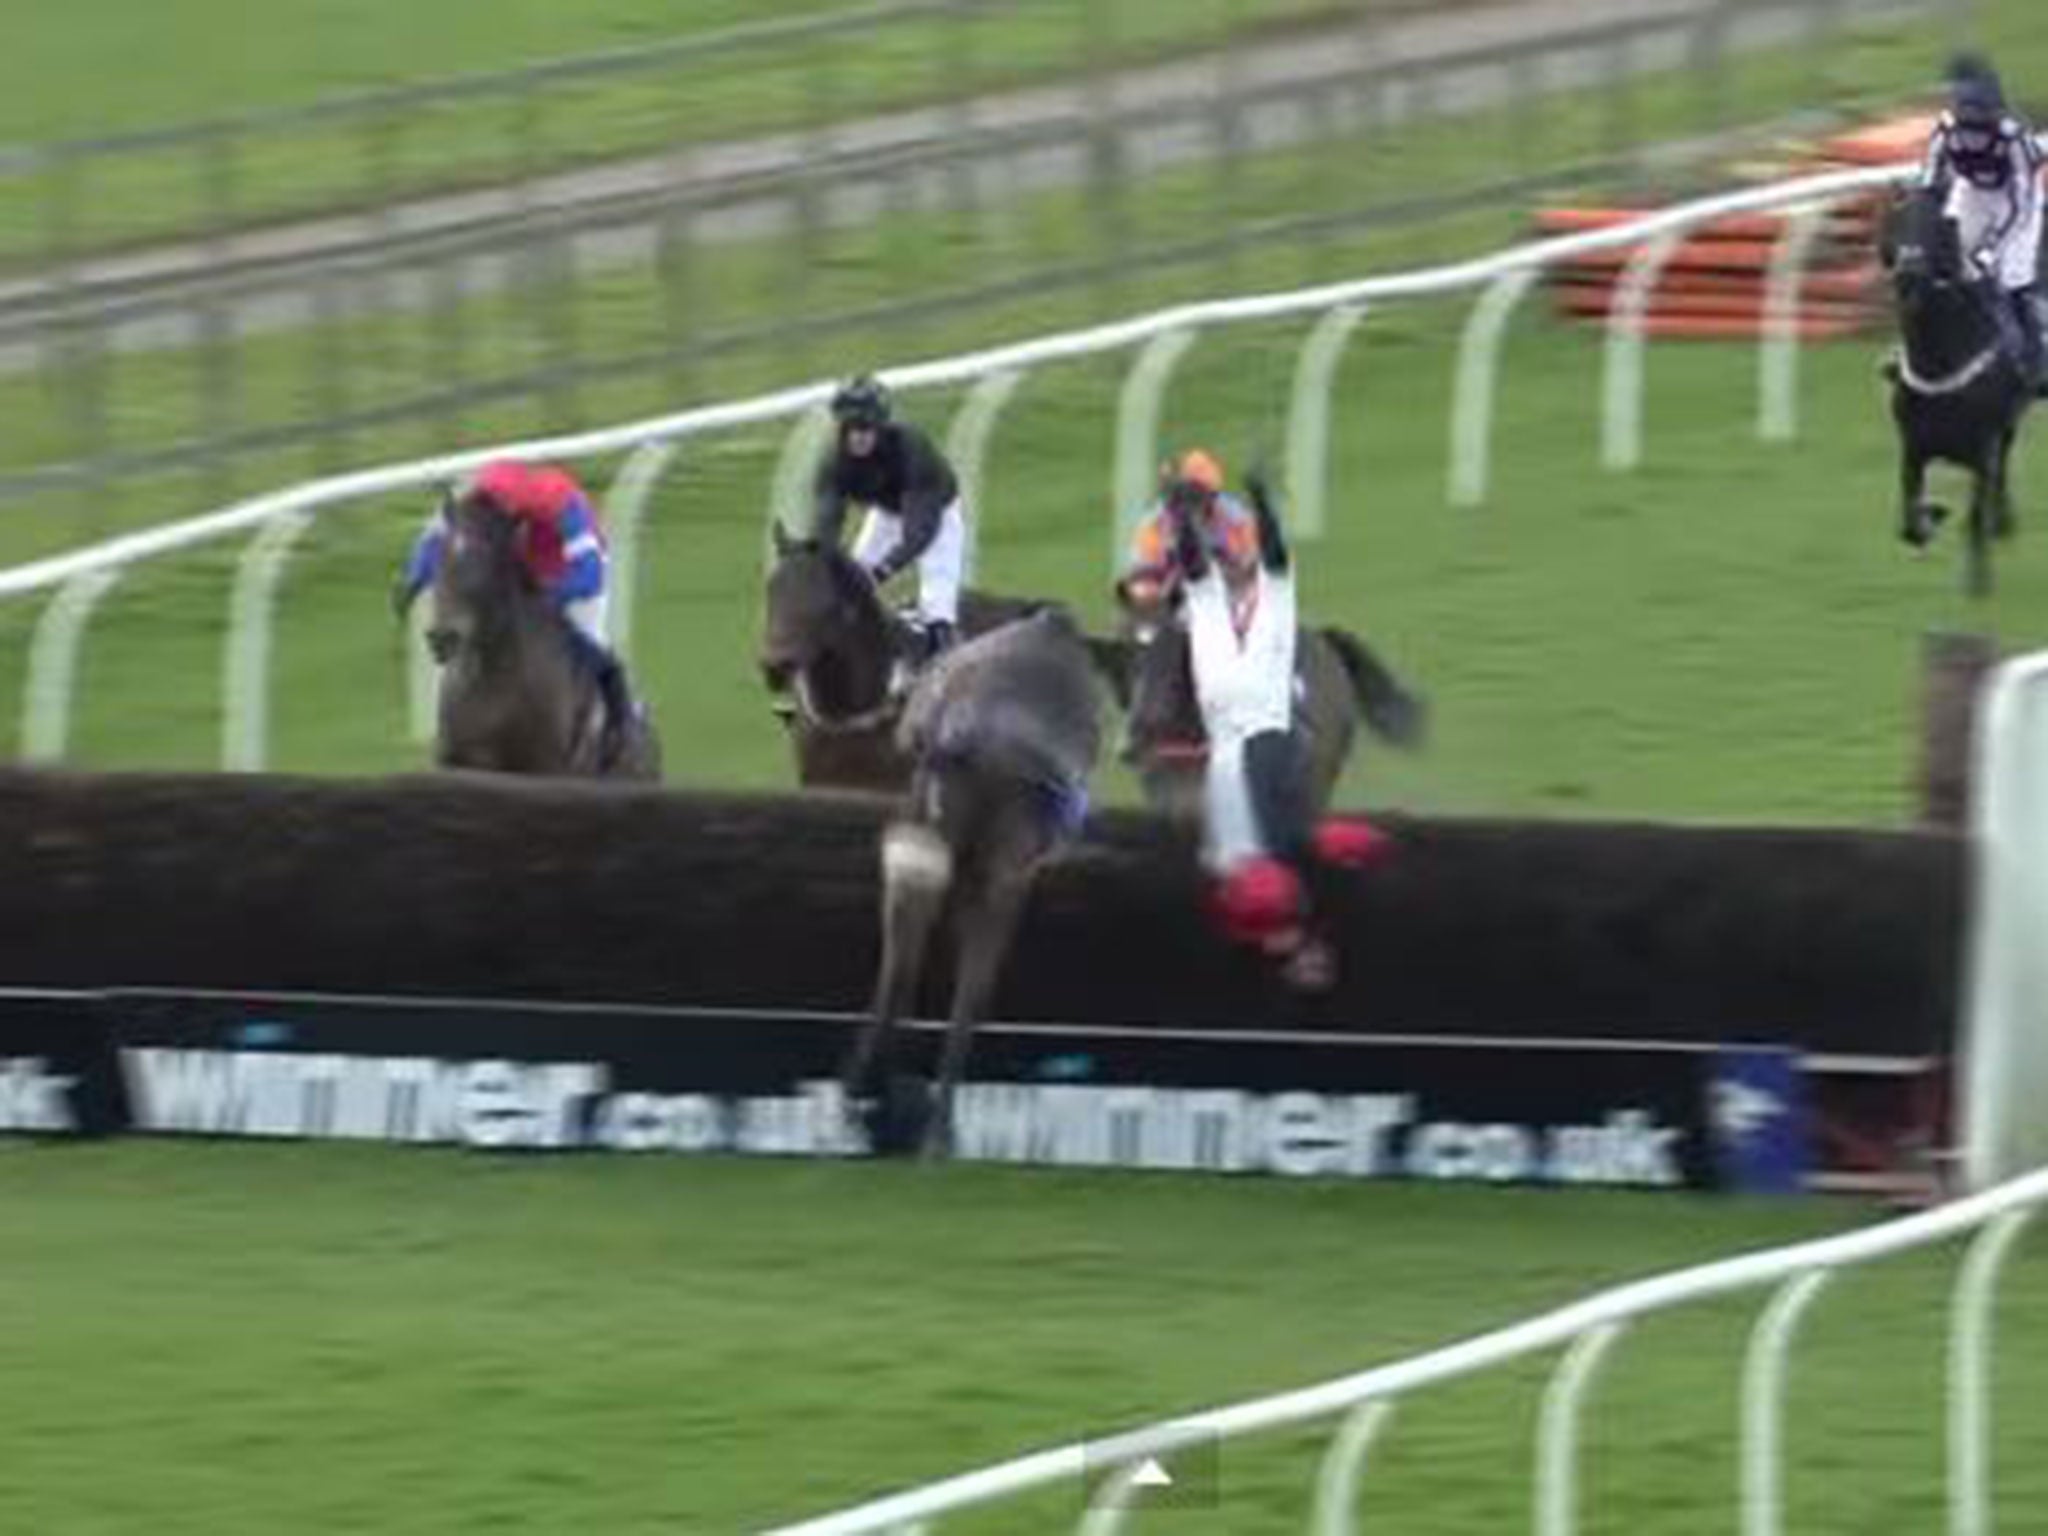 Lewis Ferguson walked away from a horror fall at Wincanton on Wednesday